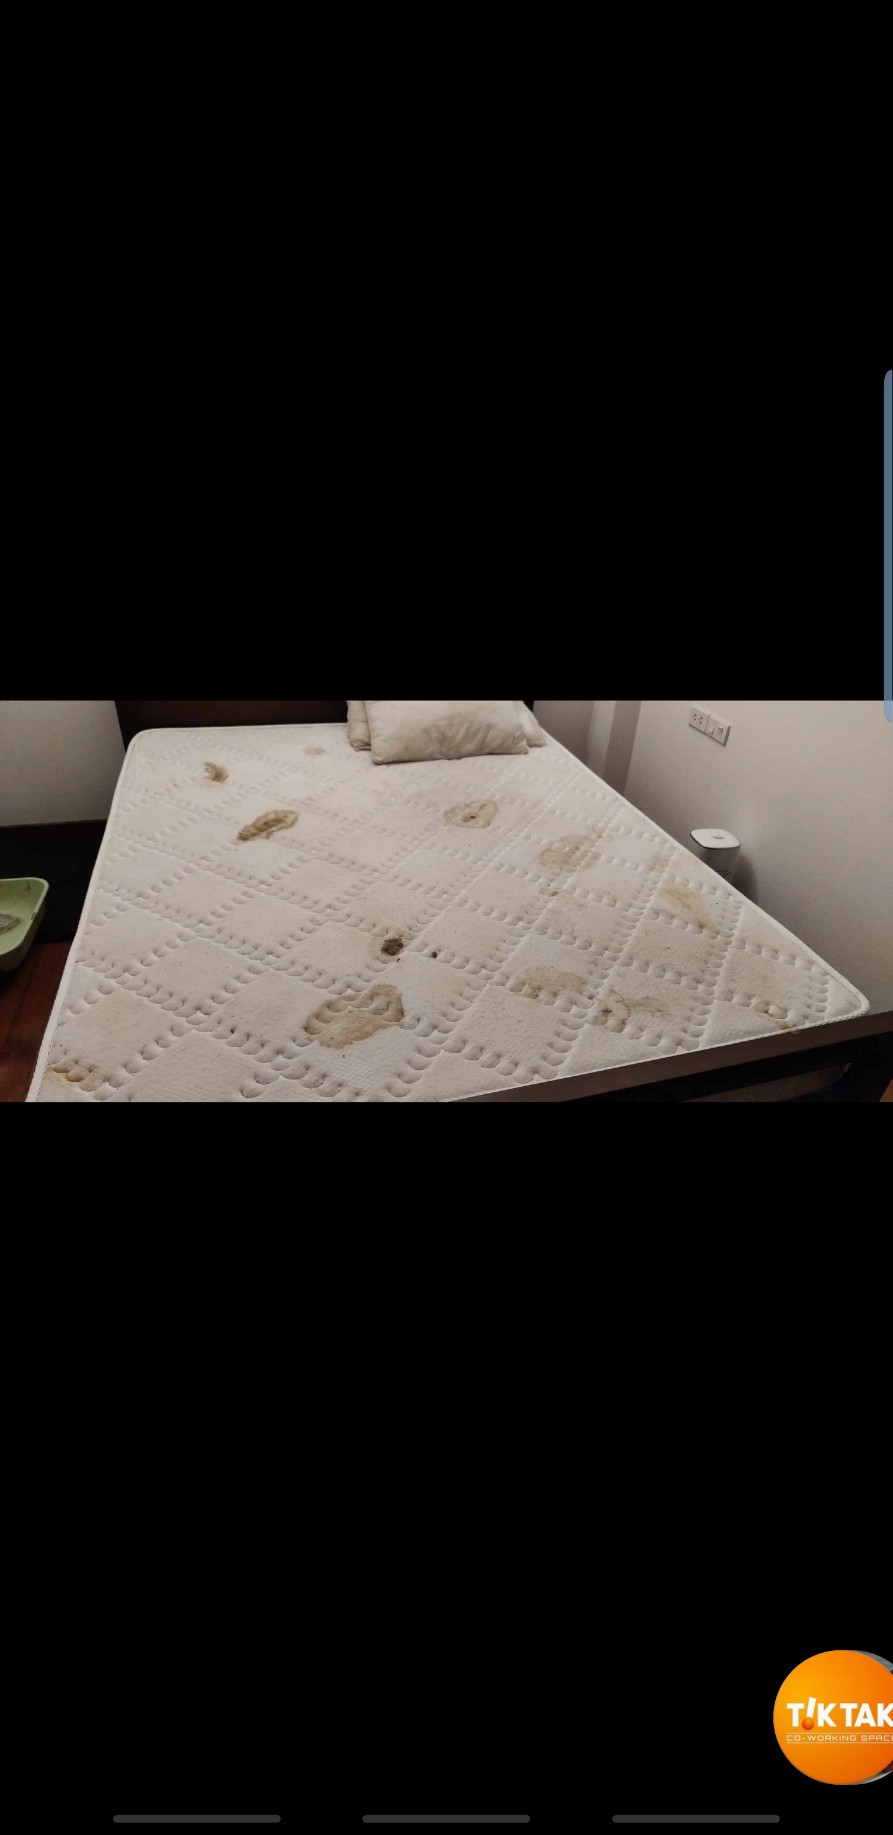 Mattress cleaning - cat vomit and mess